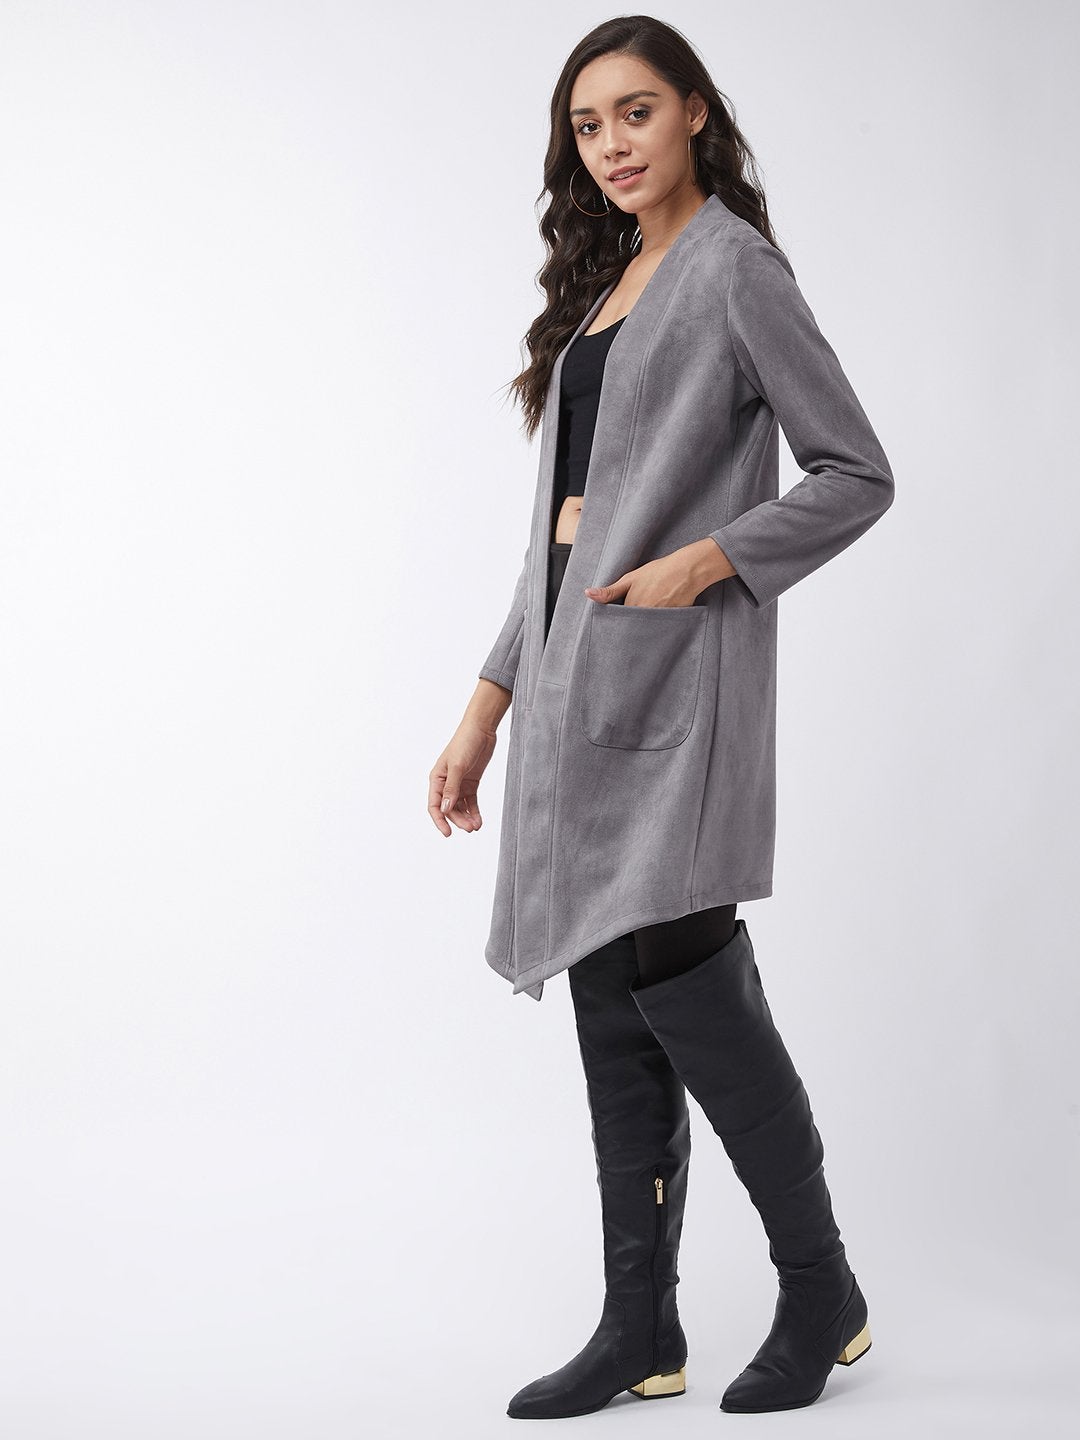 Women's Solid Long Pointed Open Shrug - Pannkh